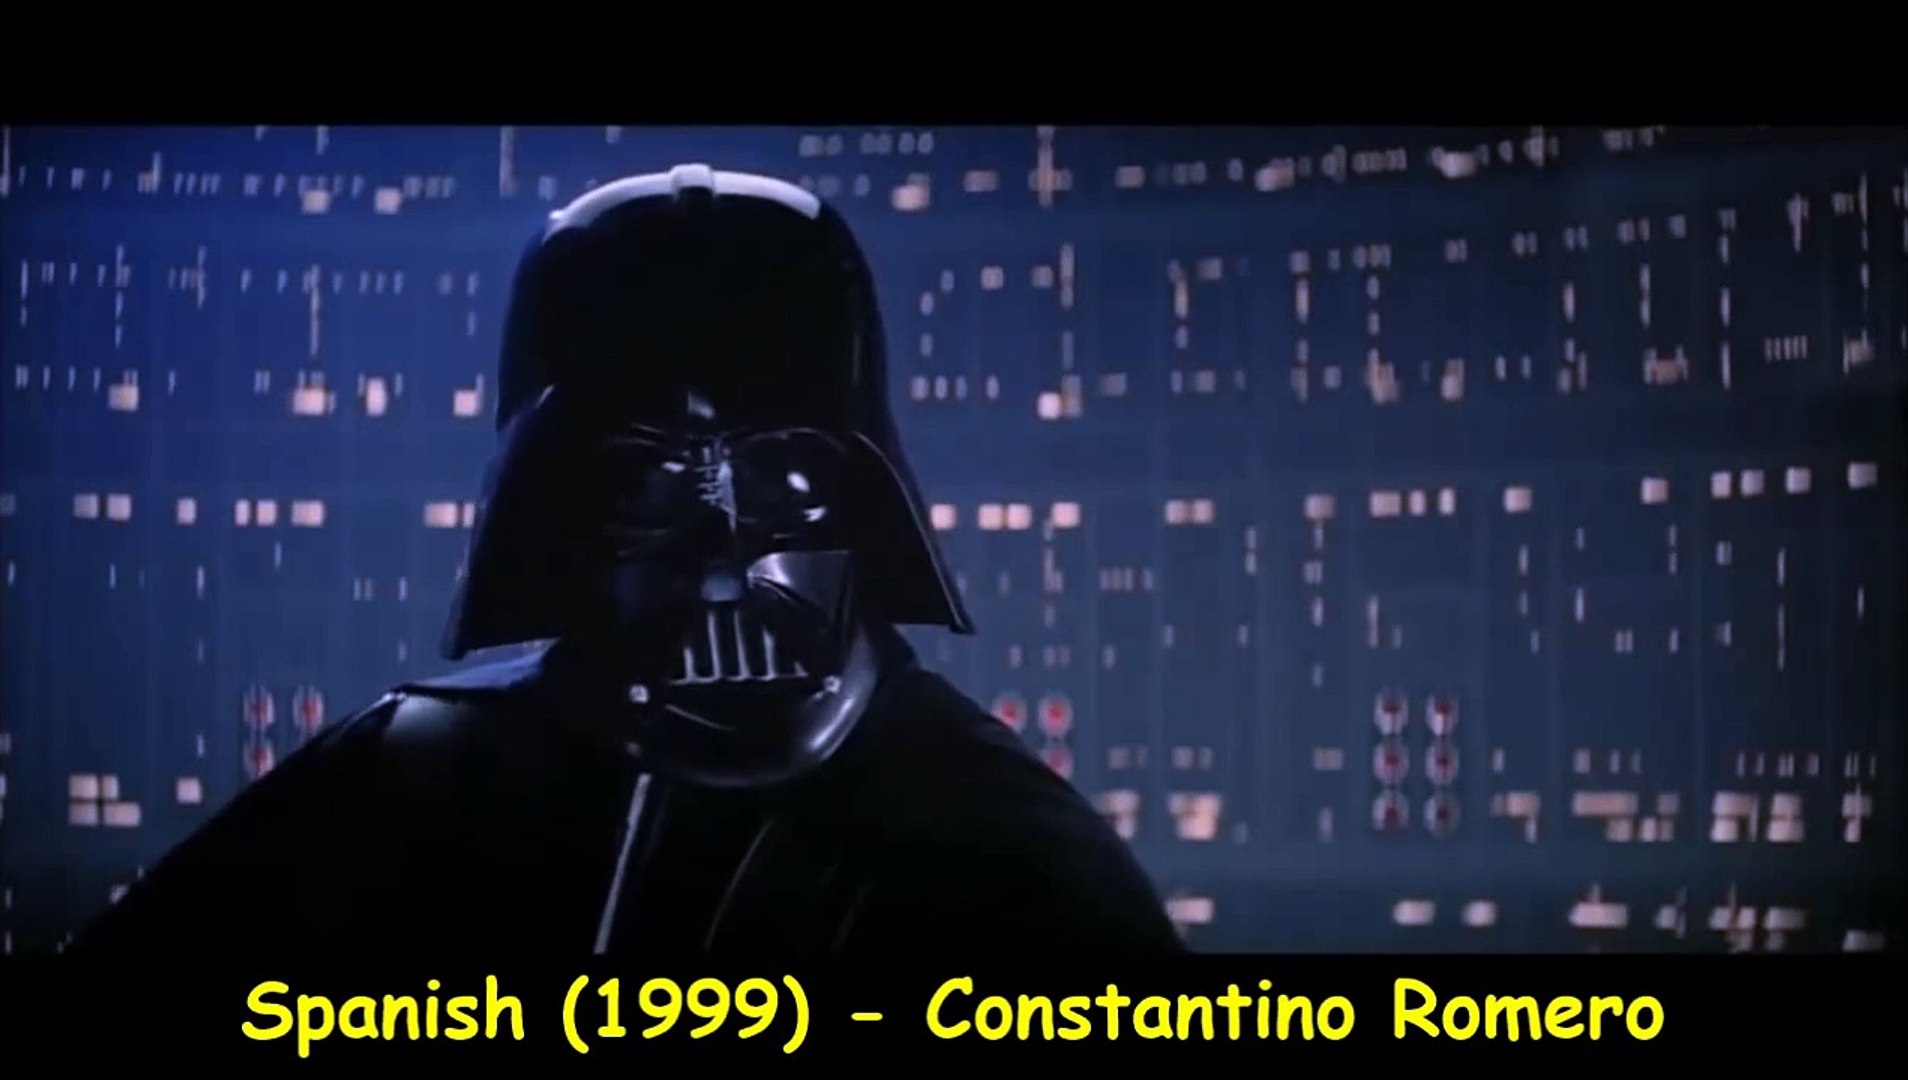 Darth Vader "No, I am your father." in 20 different languages. Star Wars  Multi language - Vidéo Dailymotion